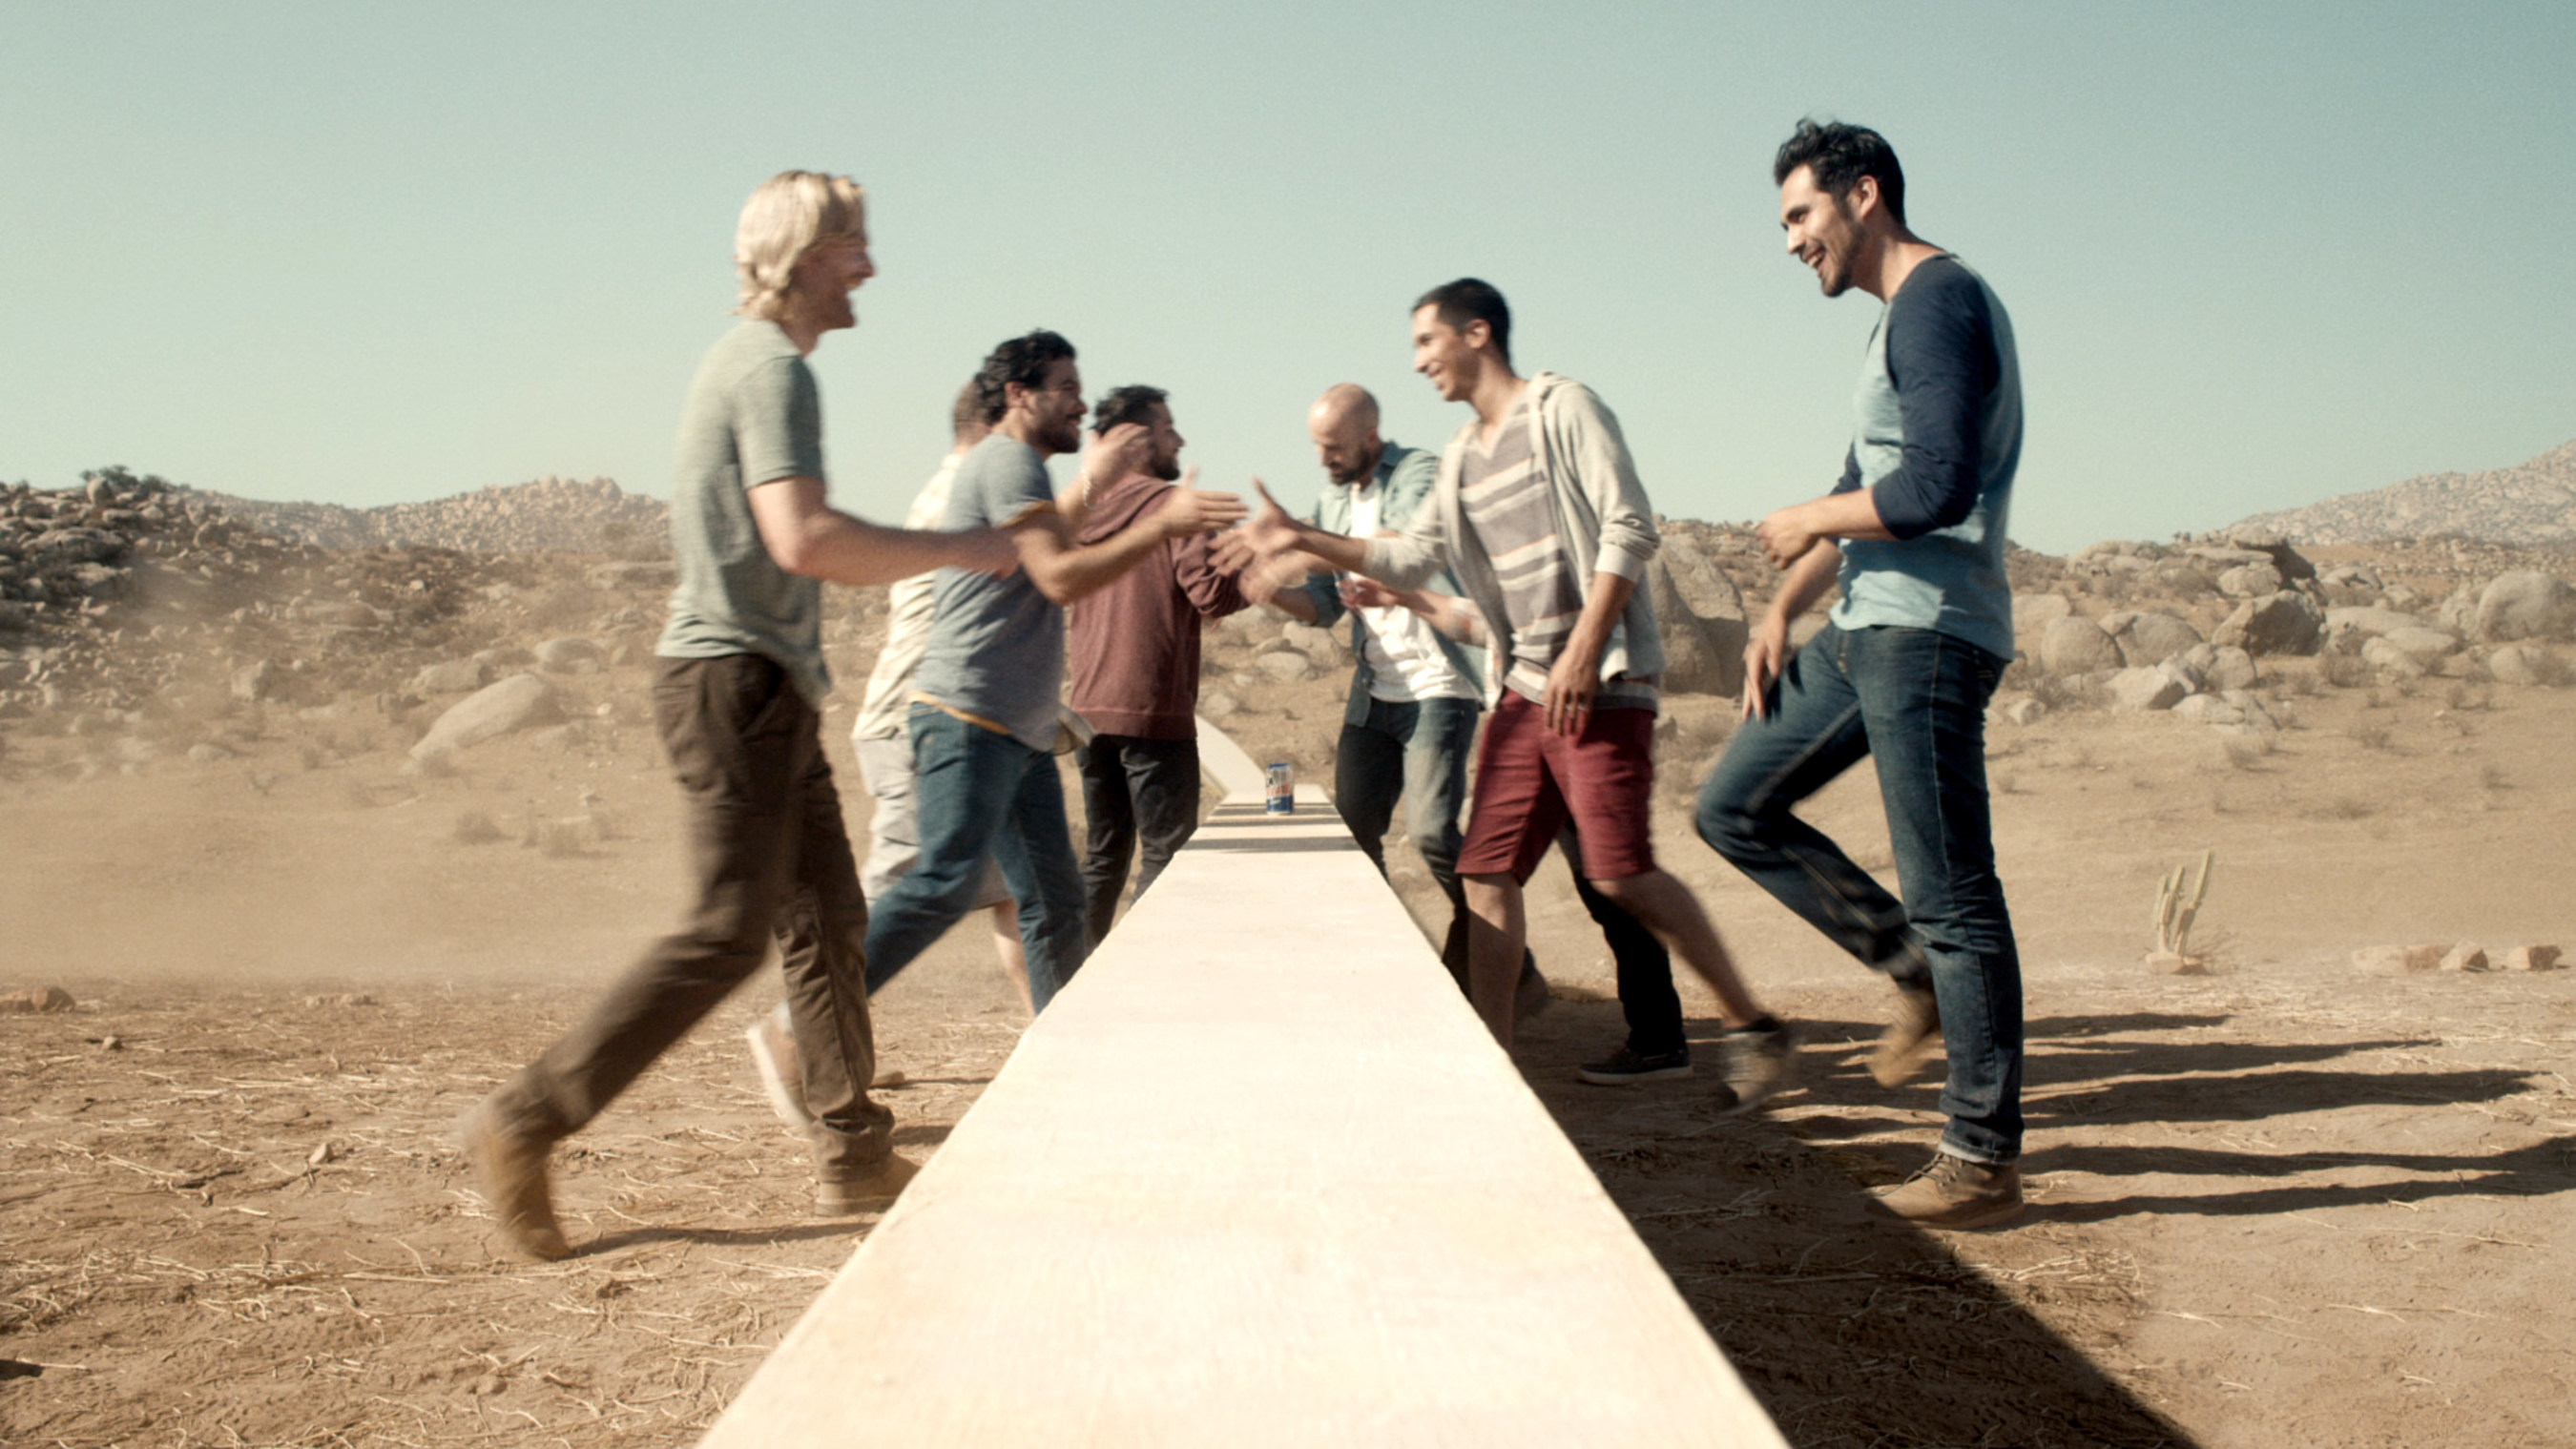 Two groups of young men, bi-cultural Hispanics from the U.S. and Mexicans from Mexico, come together over the wall, the structure is revealed to be three-feet tall, the perfect height for a group of friends to rest their Tecate's on.